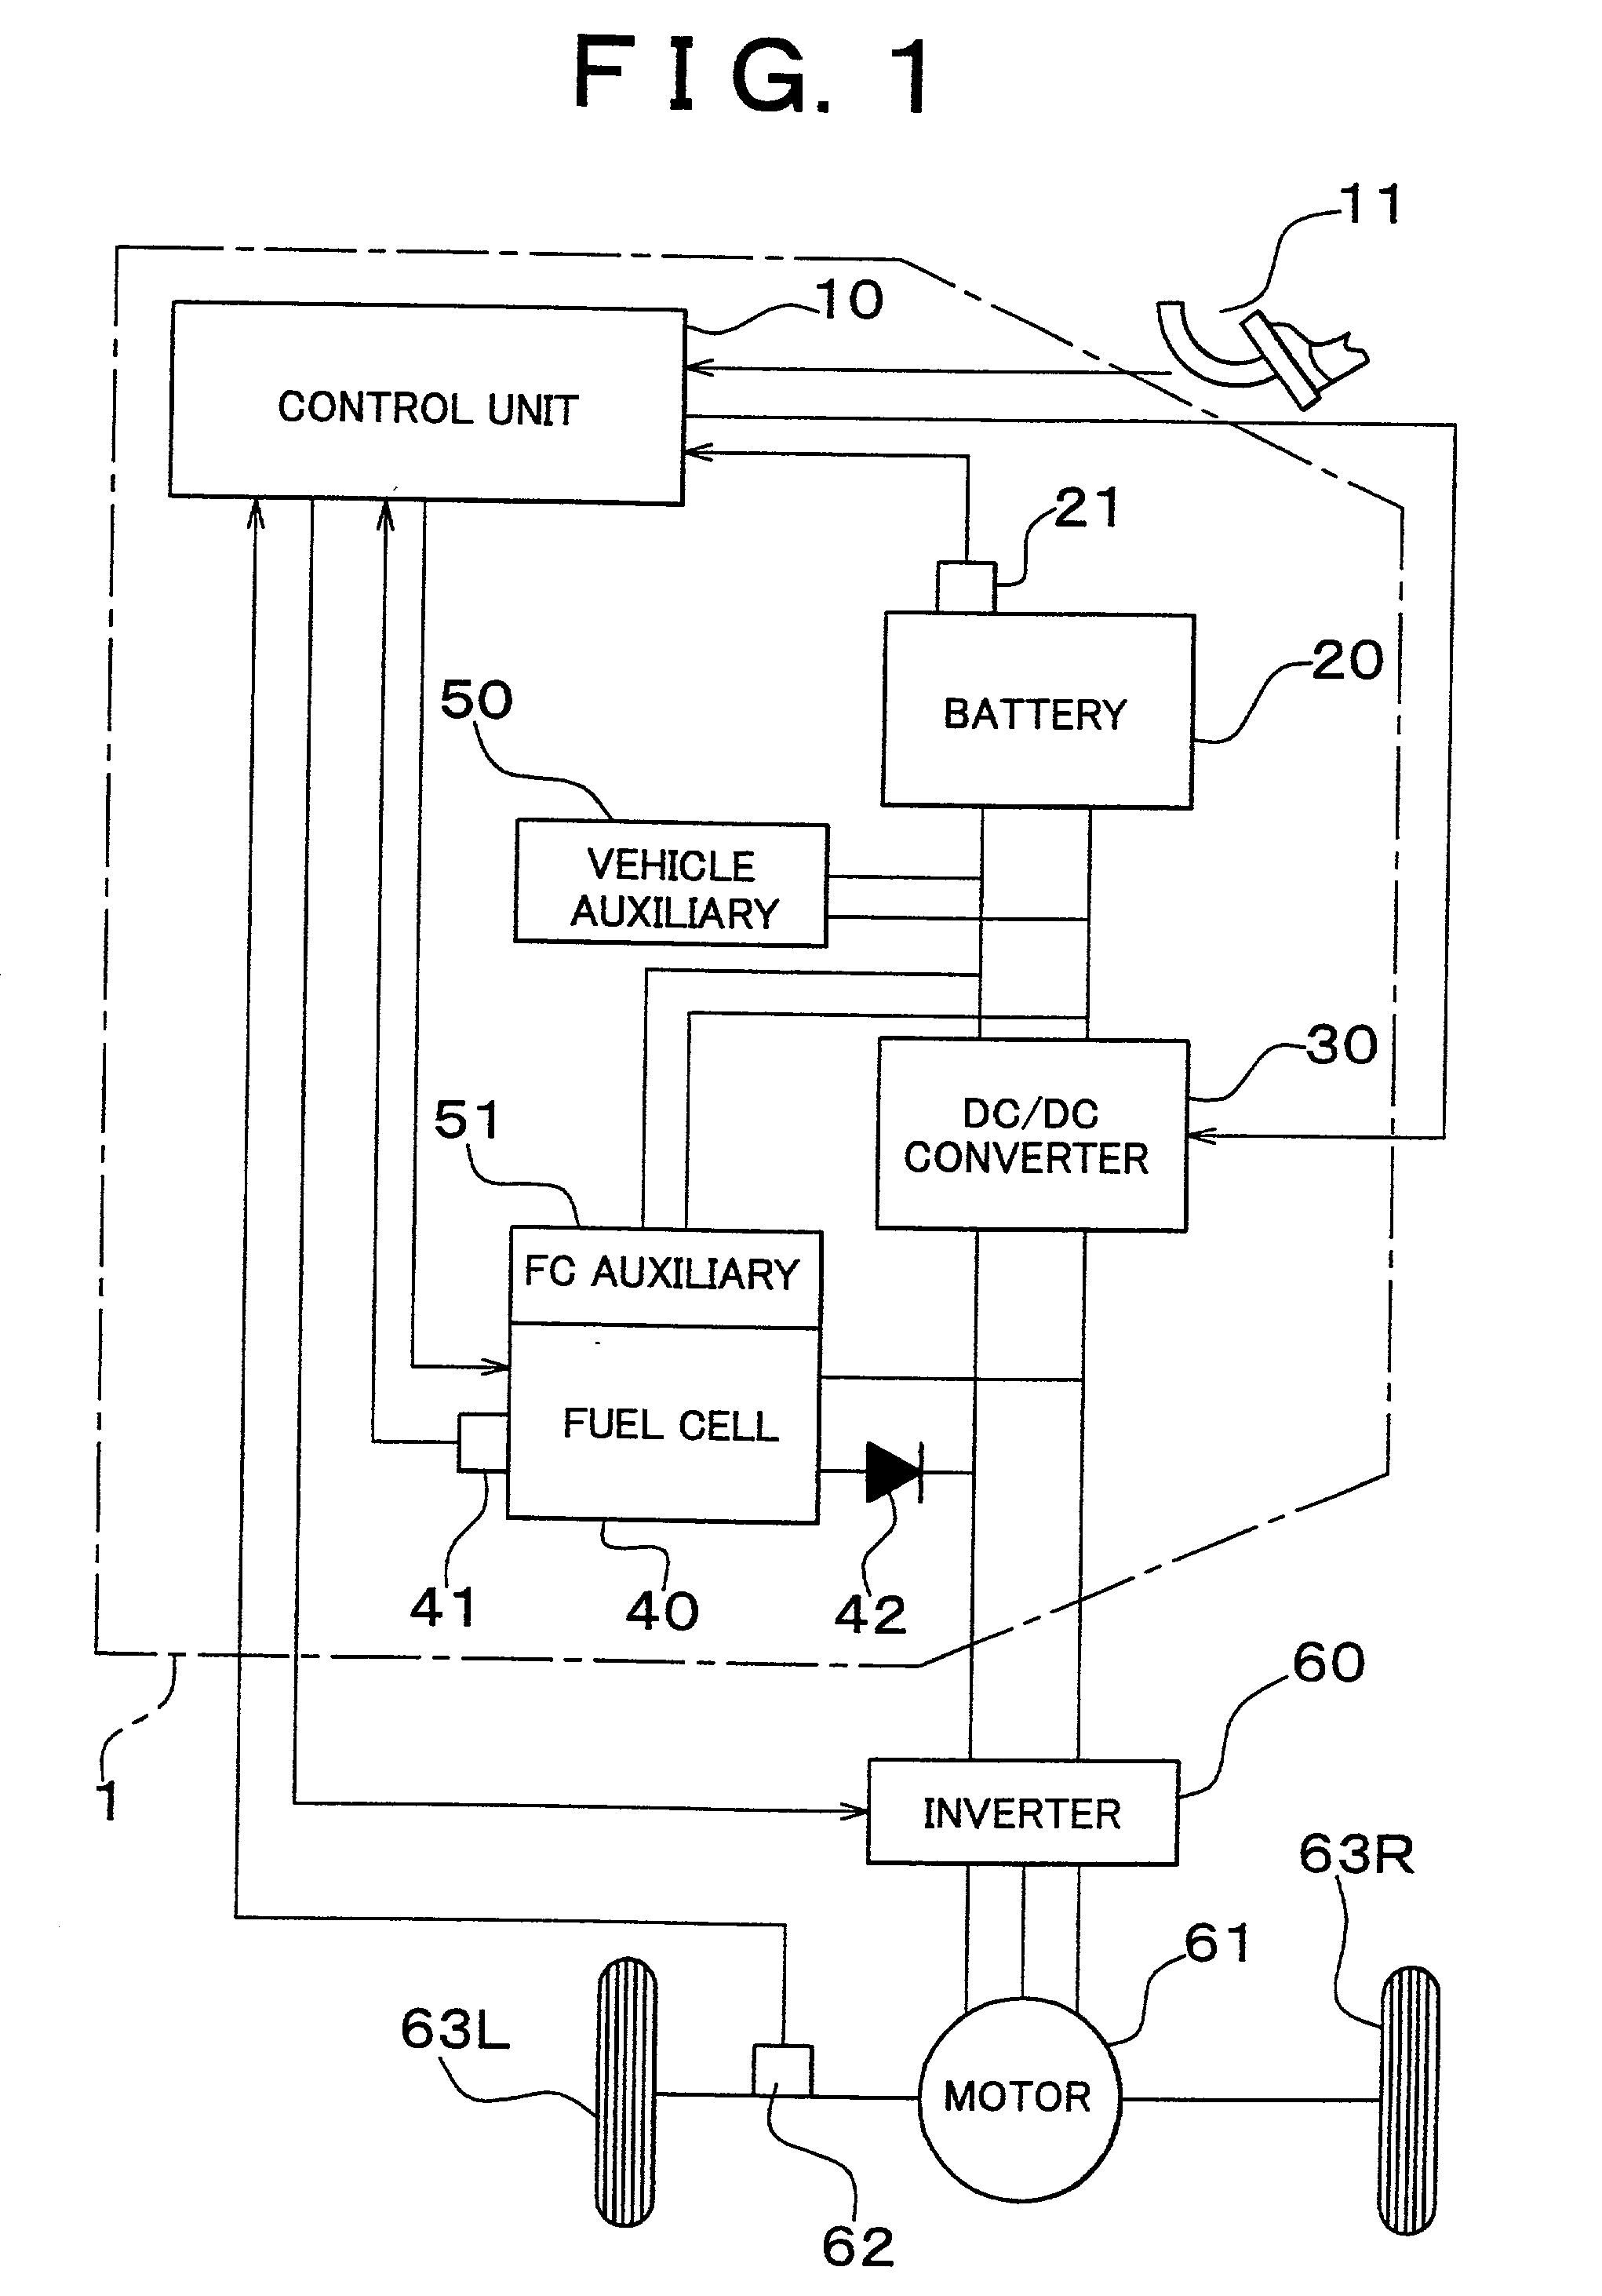 DC power supply using fuel cell